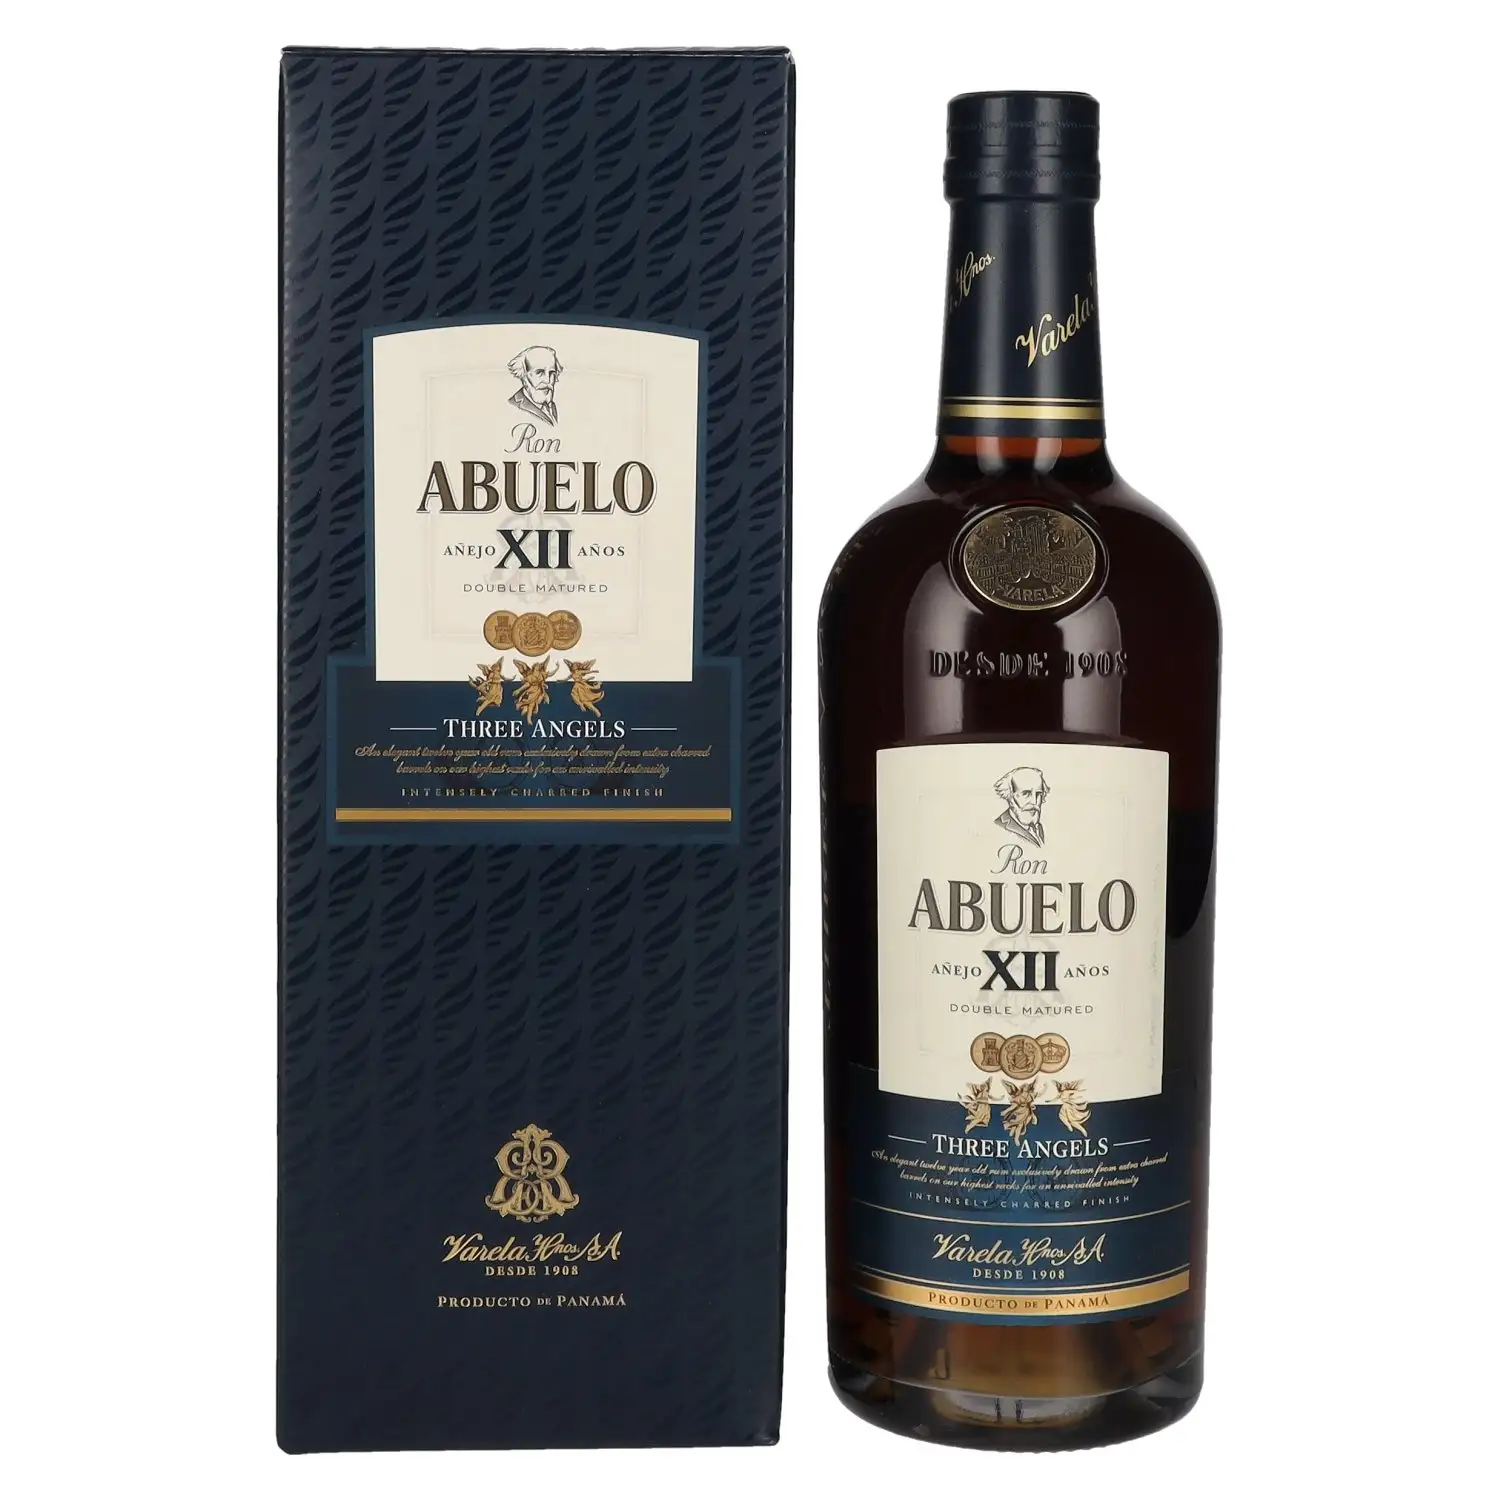 Image of the front of the bottle of the rum Ron Abuelo Añejo XII Años (Three Angels)